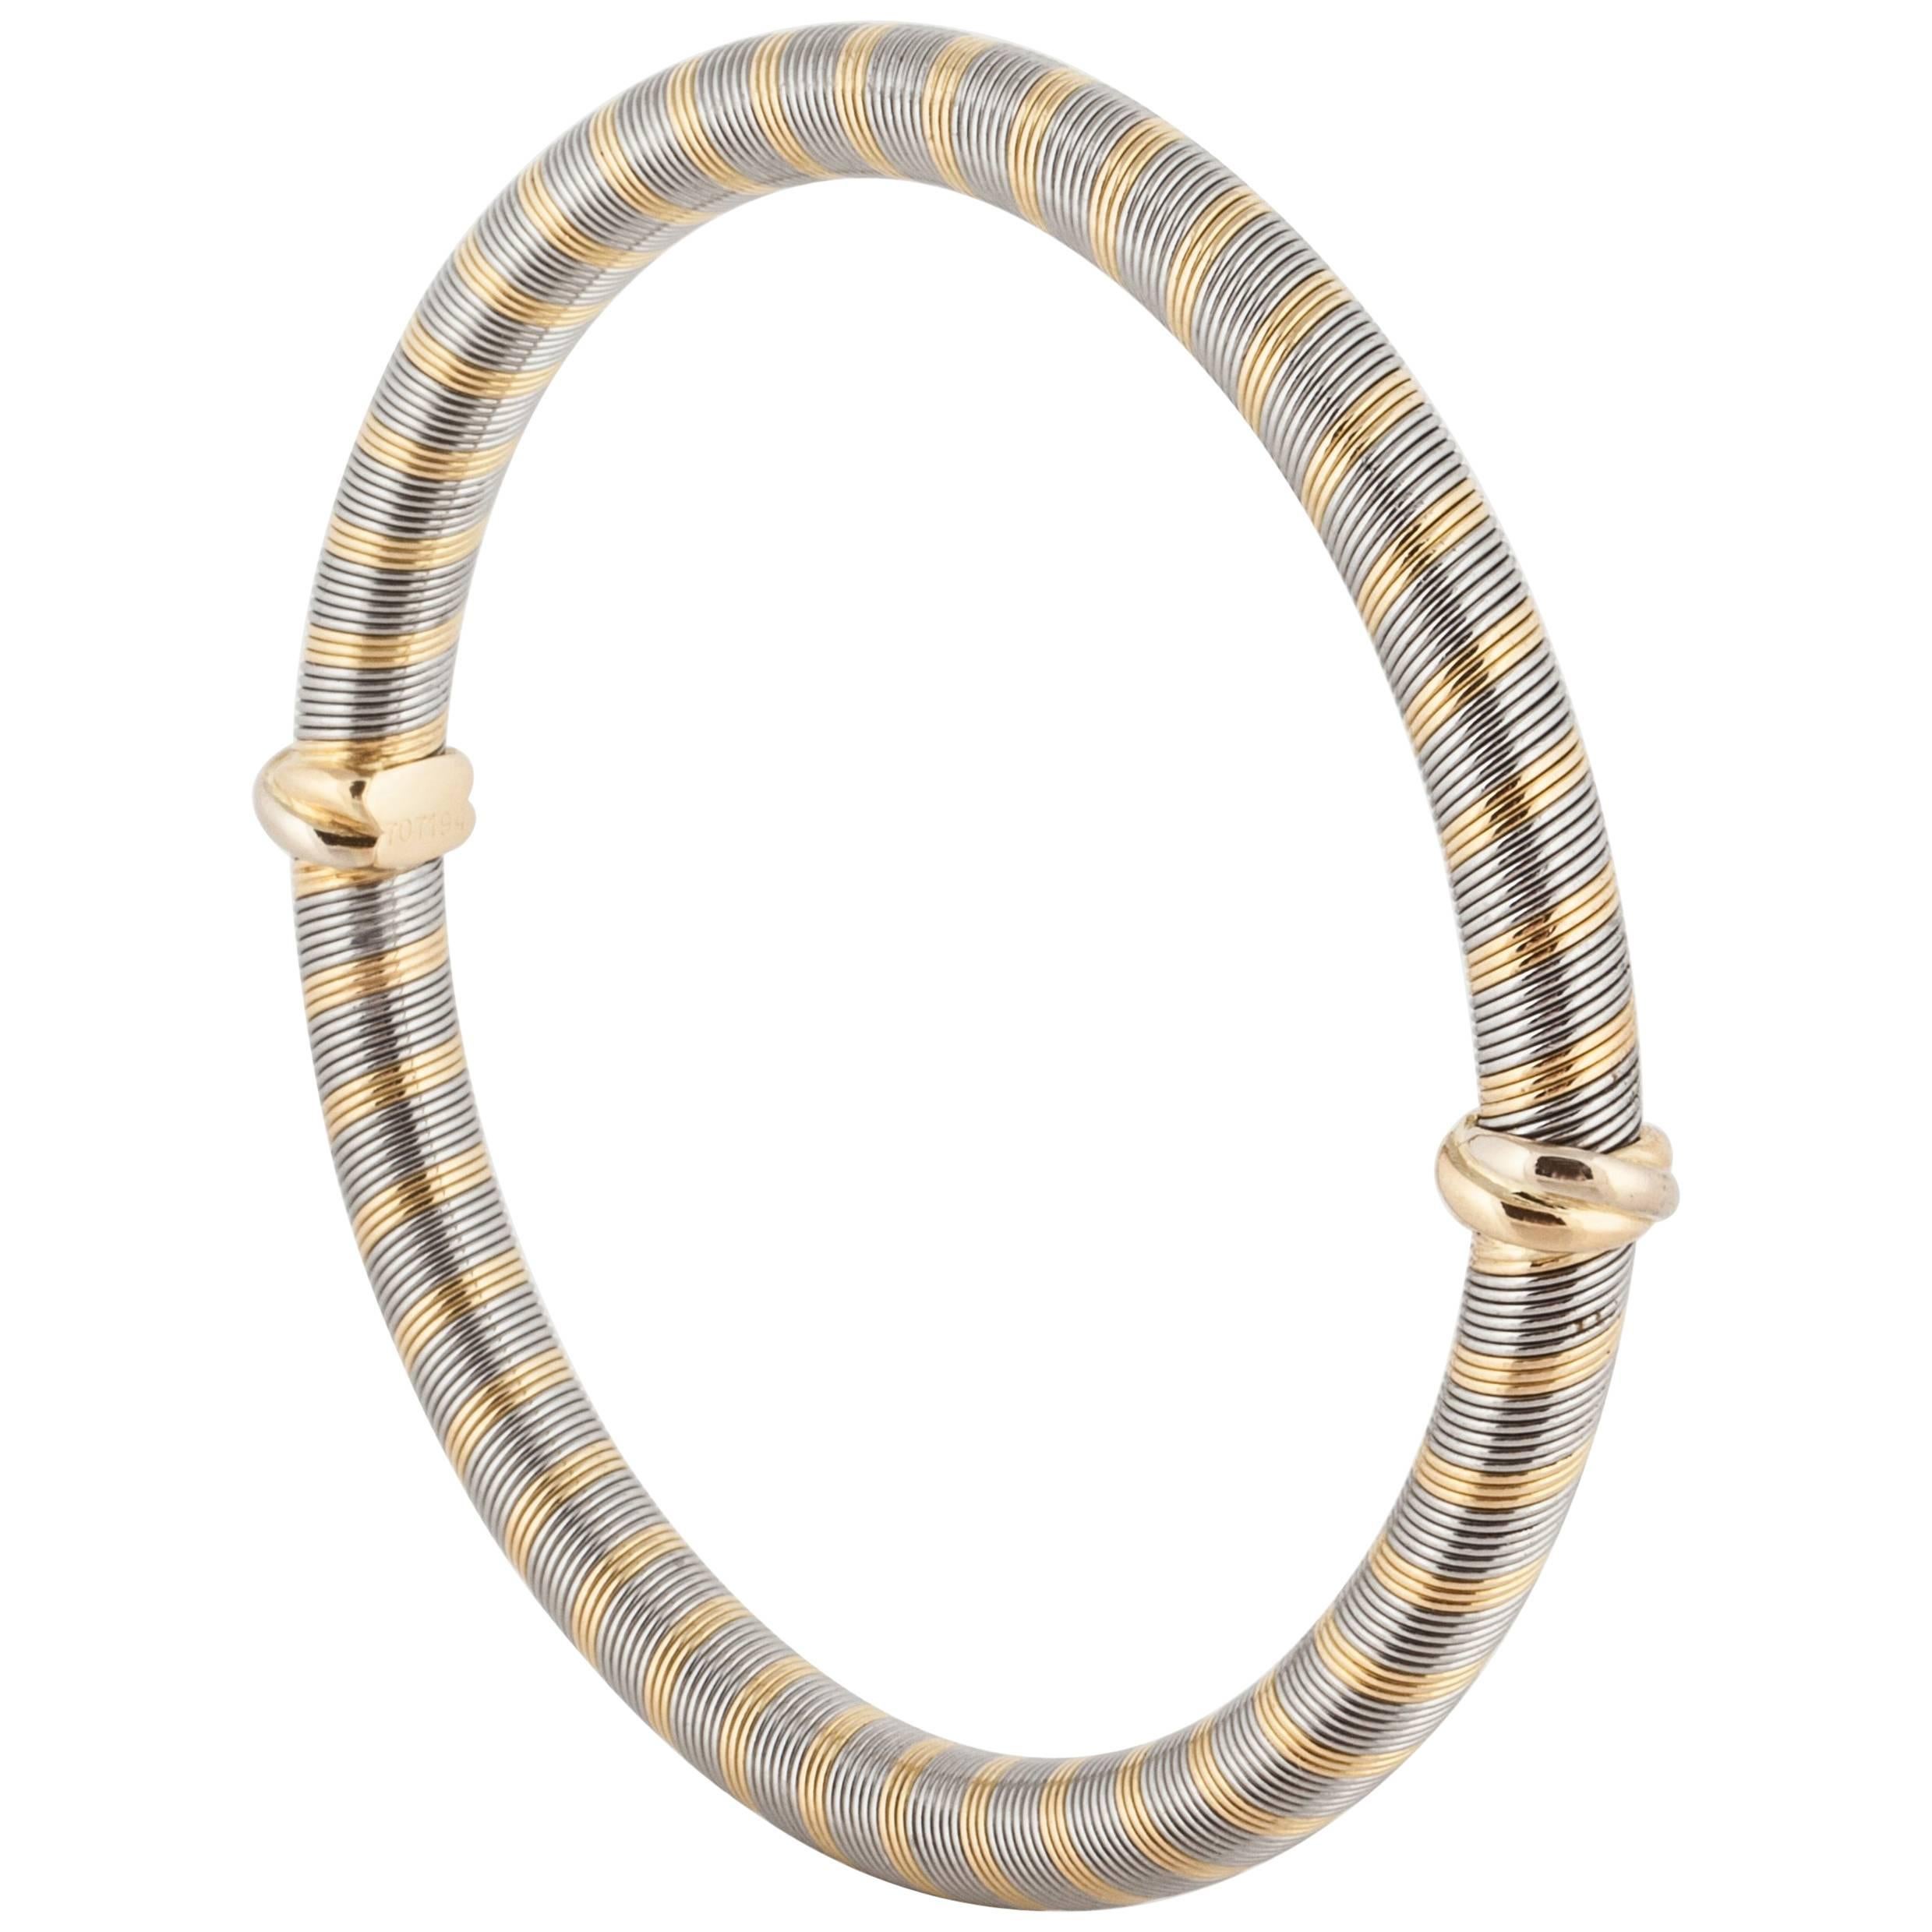 Cartier 18K White and Yellow Gold Bangle Bracelet